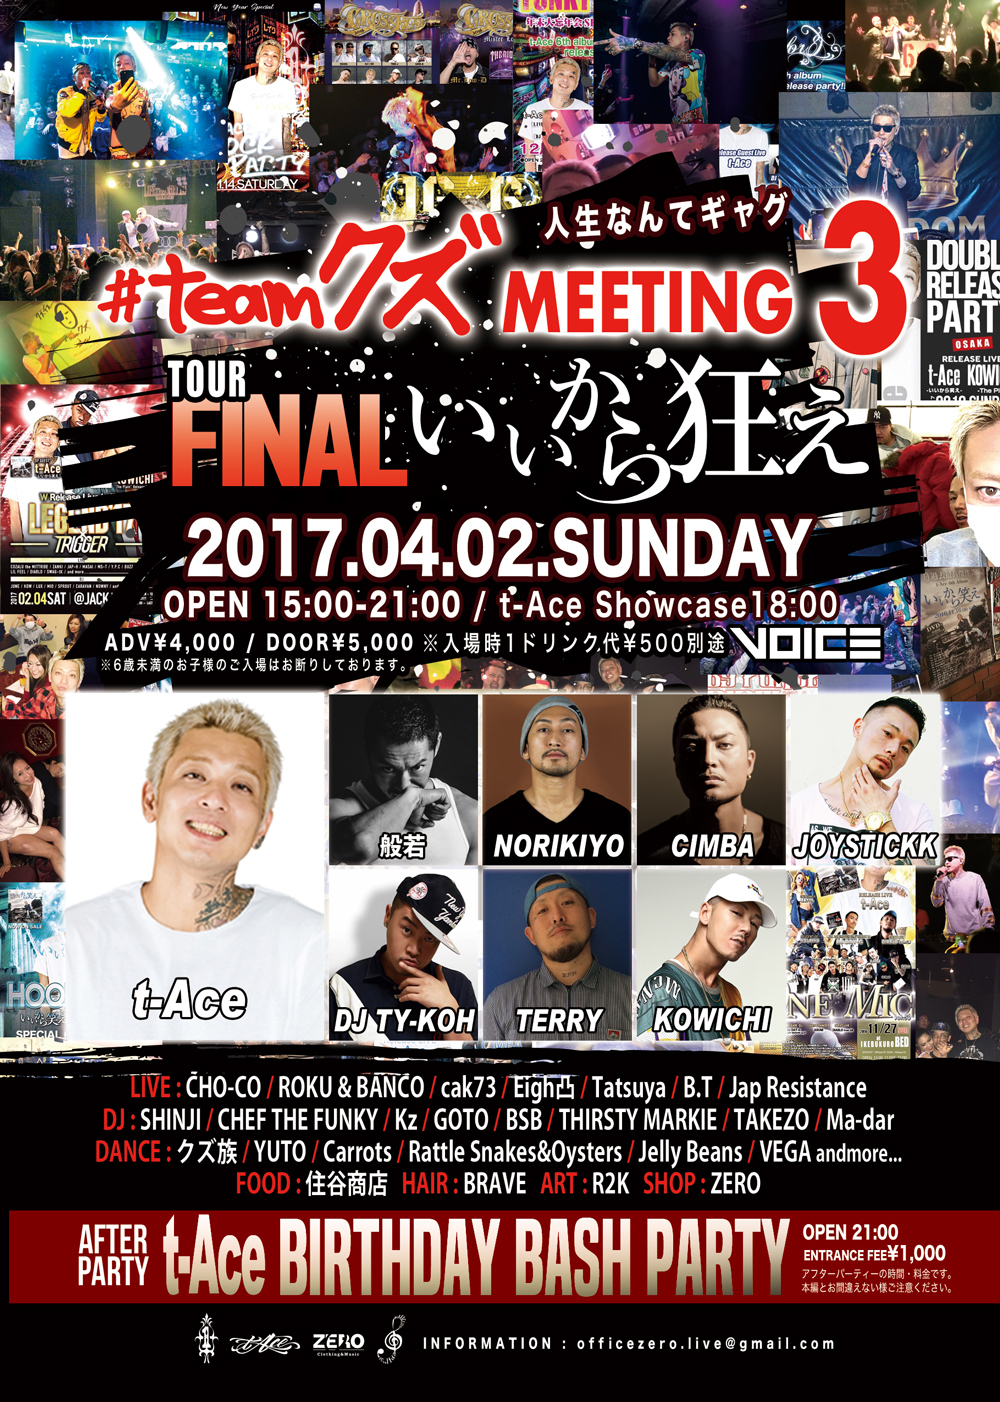 4 2 Teamクズ Meeting 3 Tour Final いいから狂え 出演決定